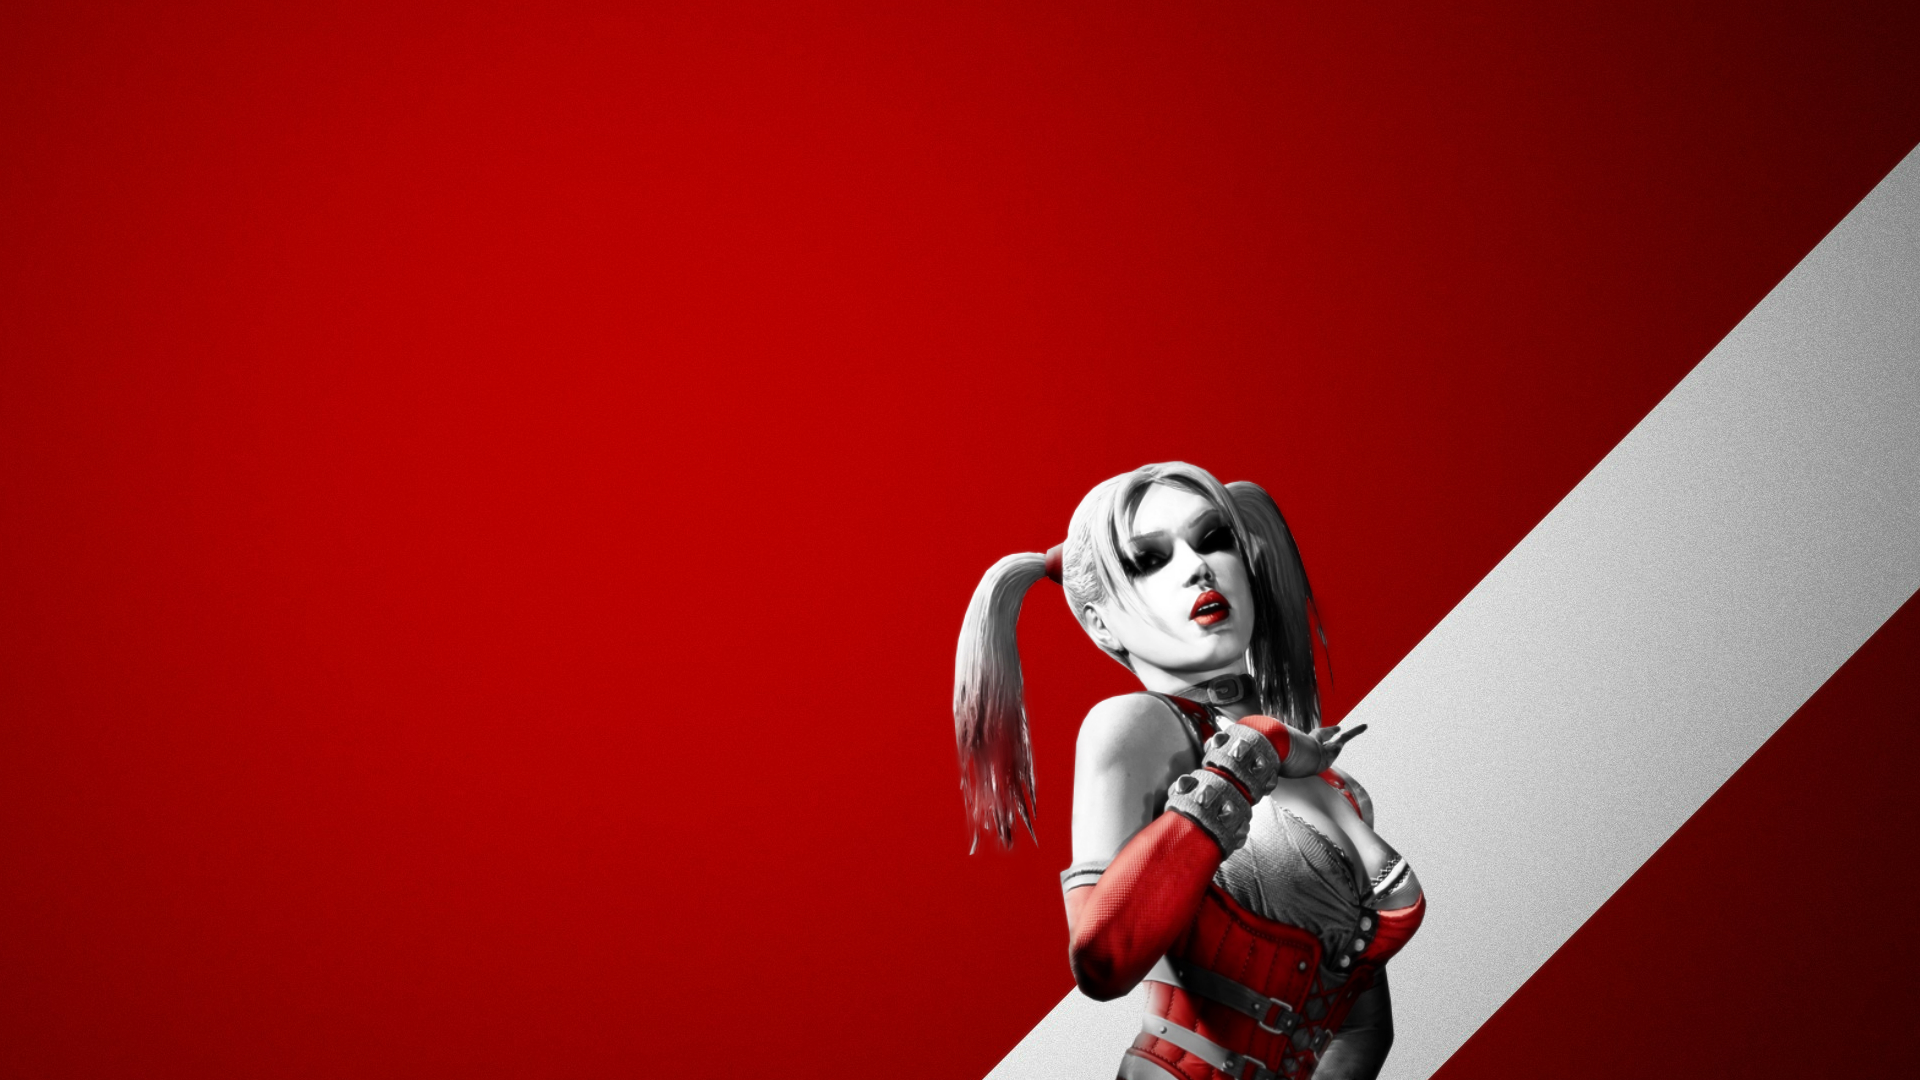 Harley Quinn Wallpaper Requested By Nolan989890 On